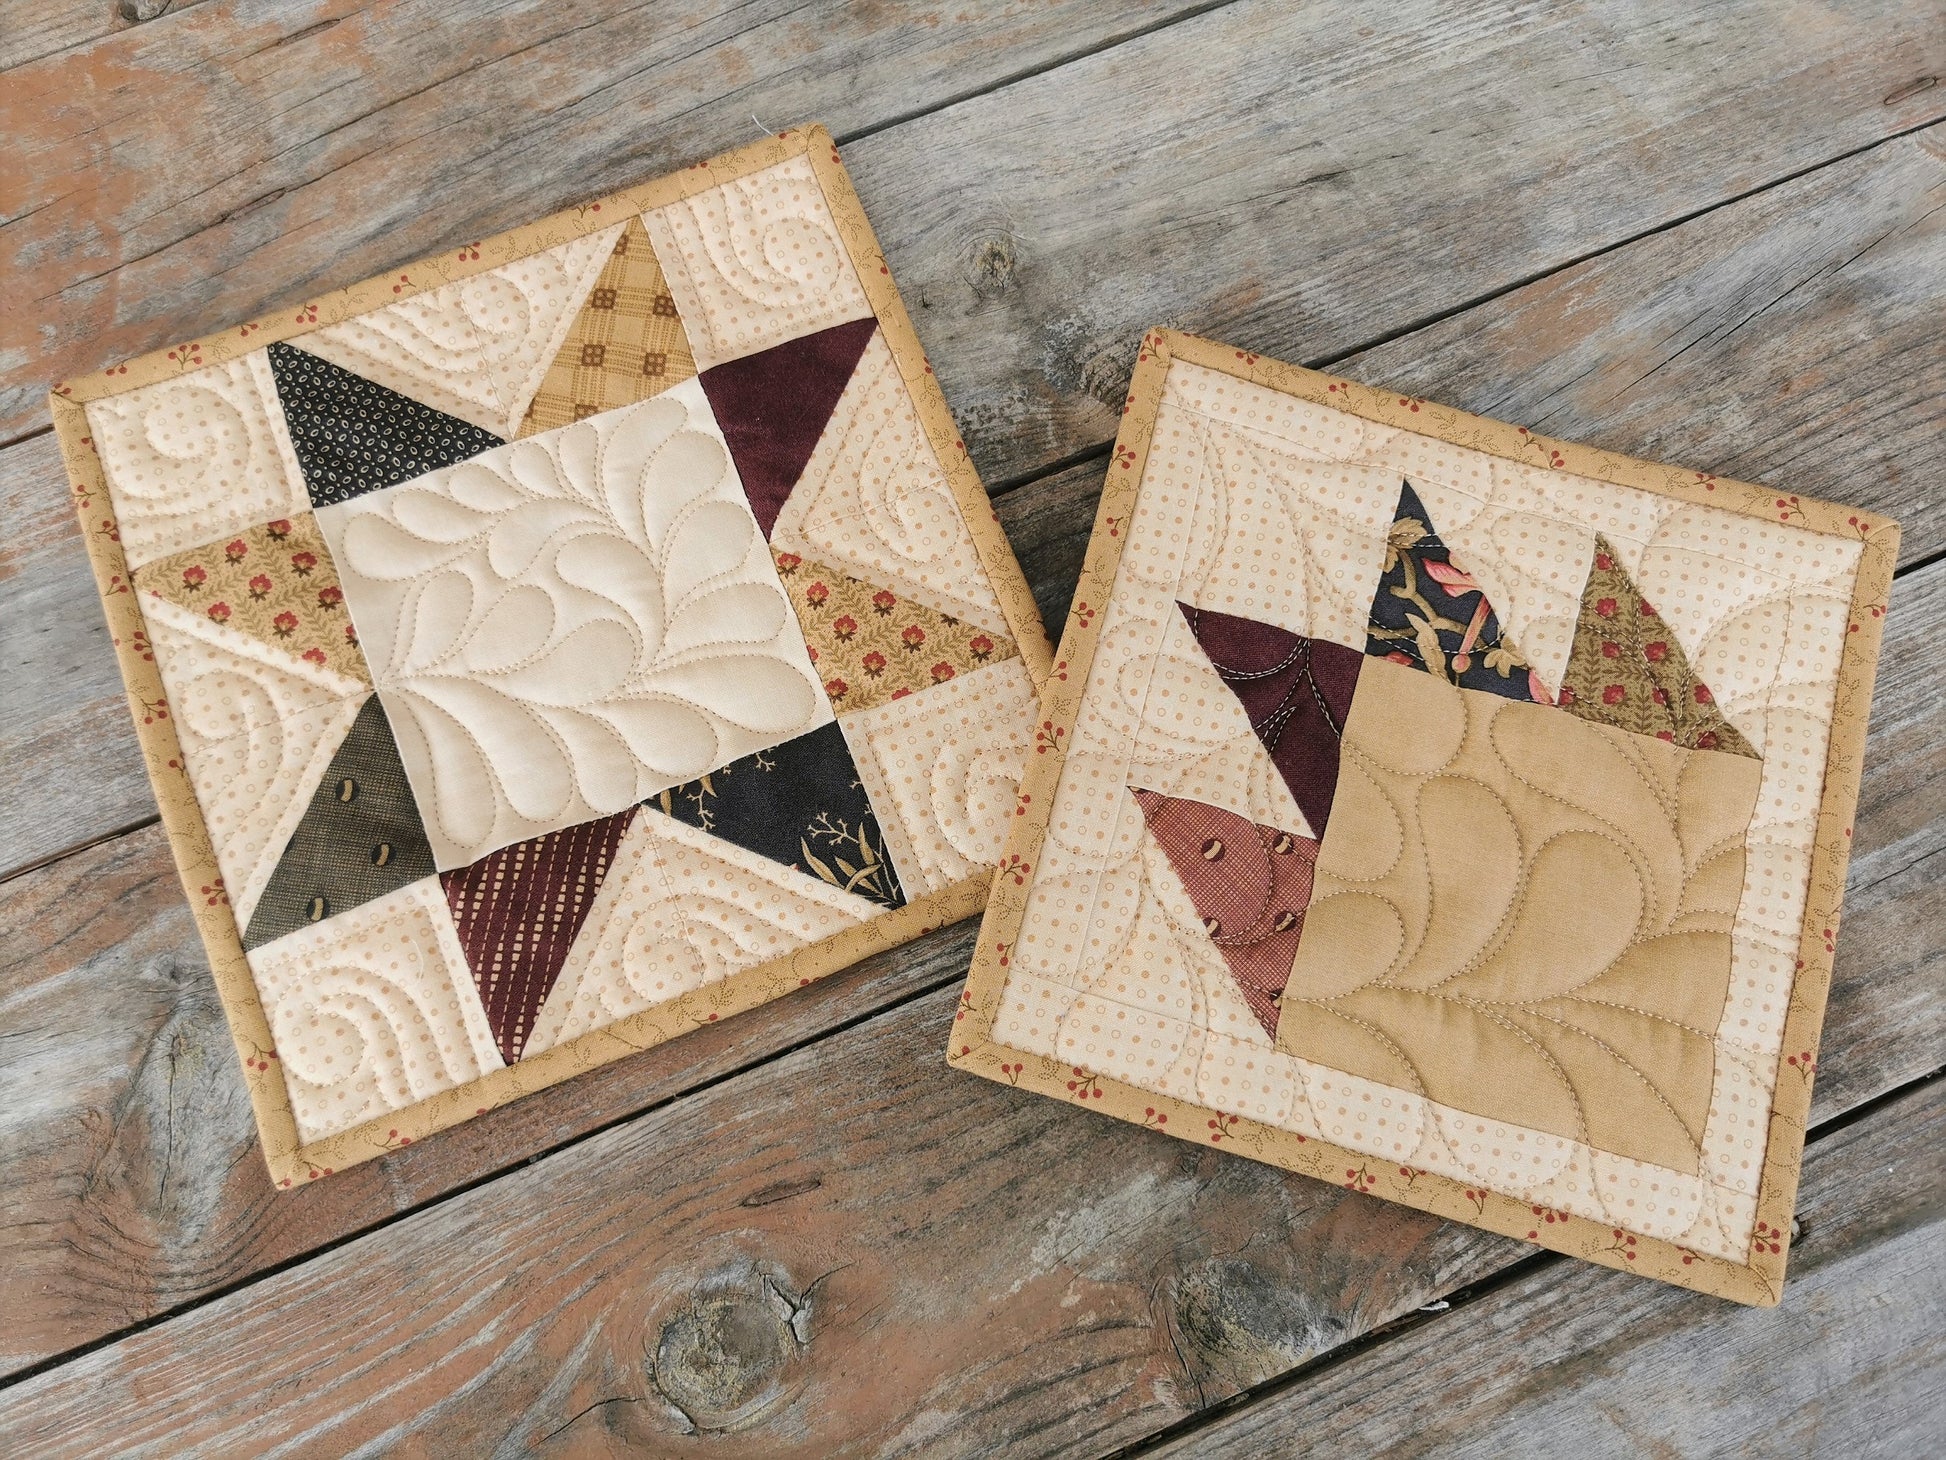 patchwork potholders shown side by side on wooden table